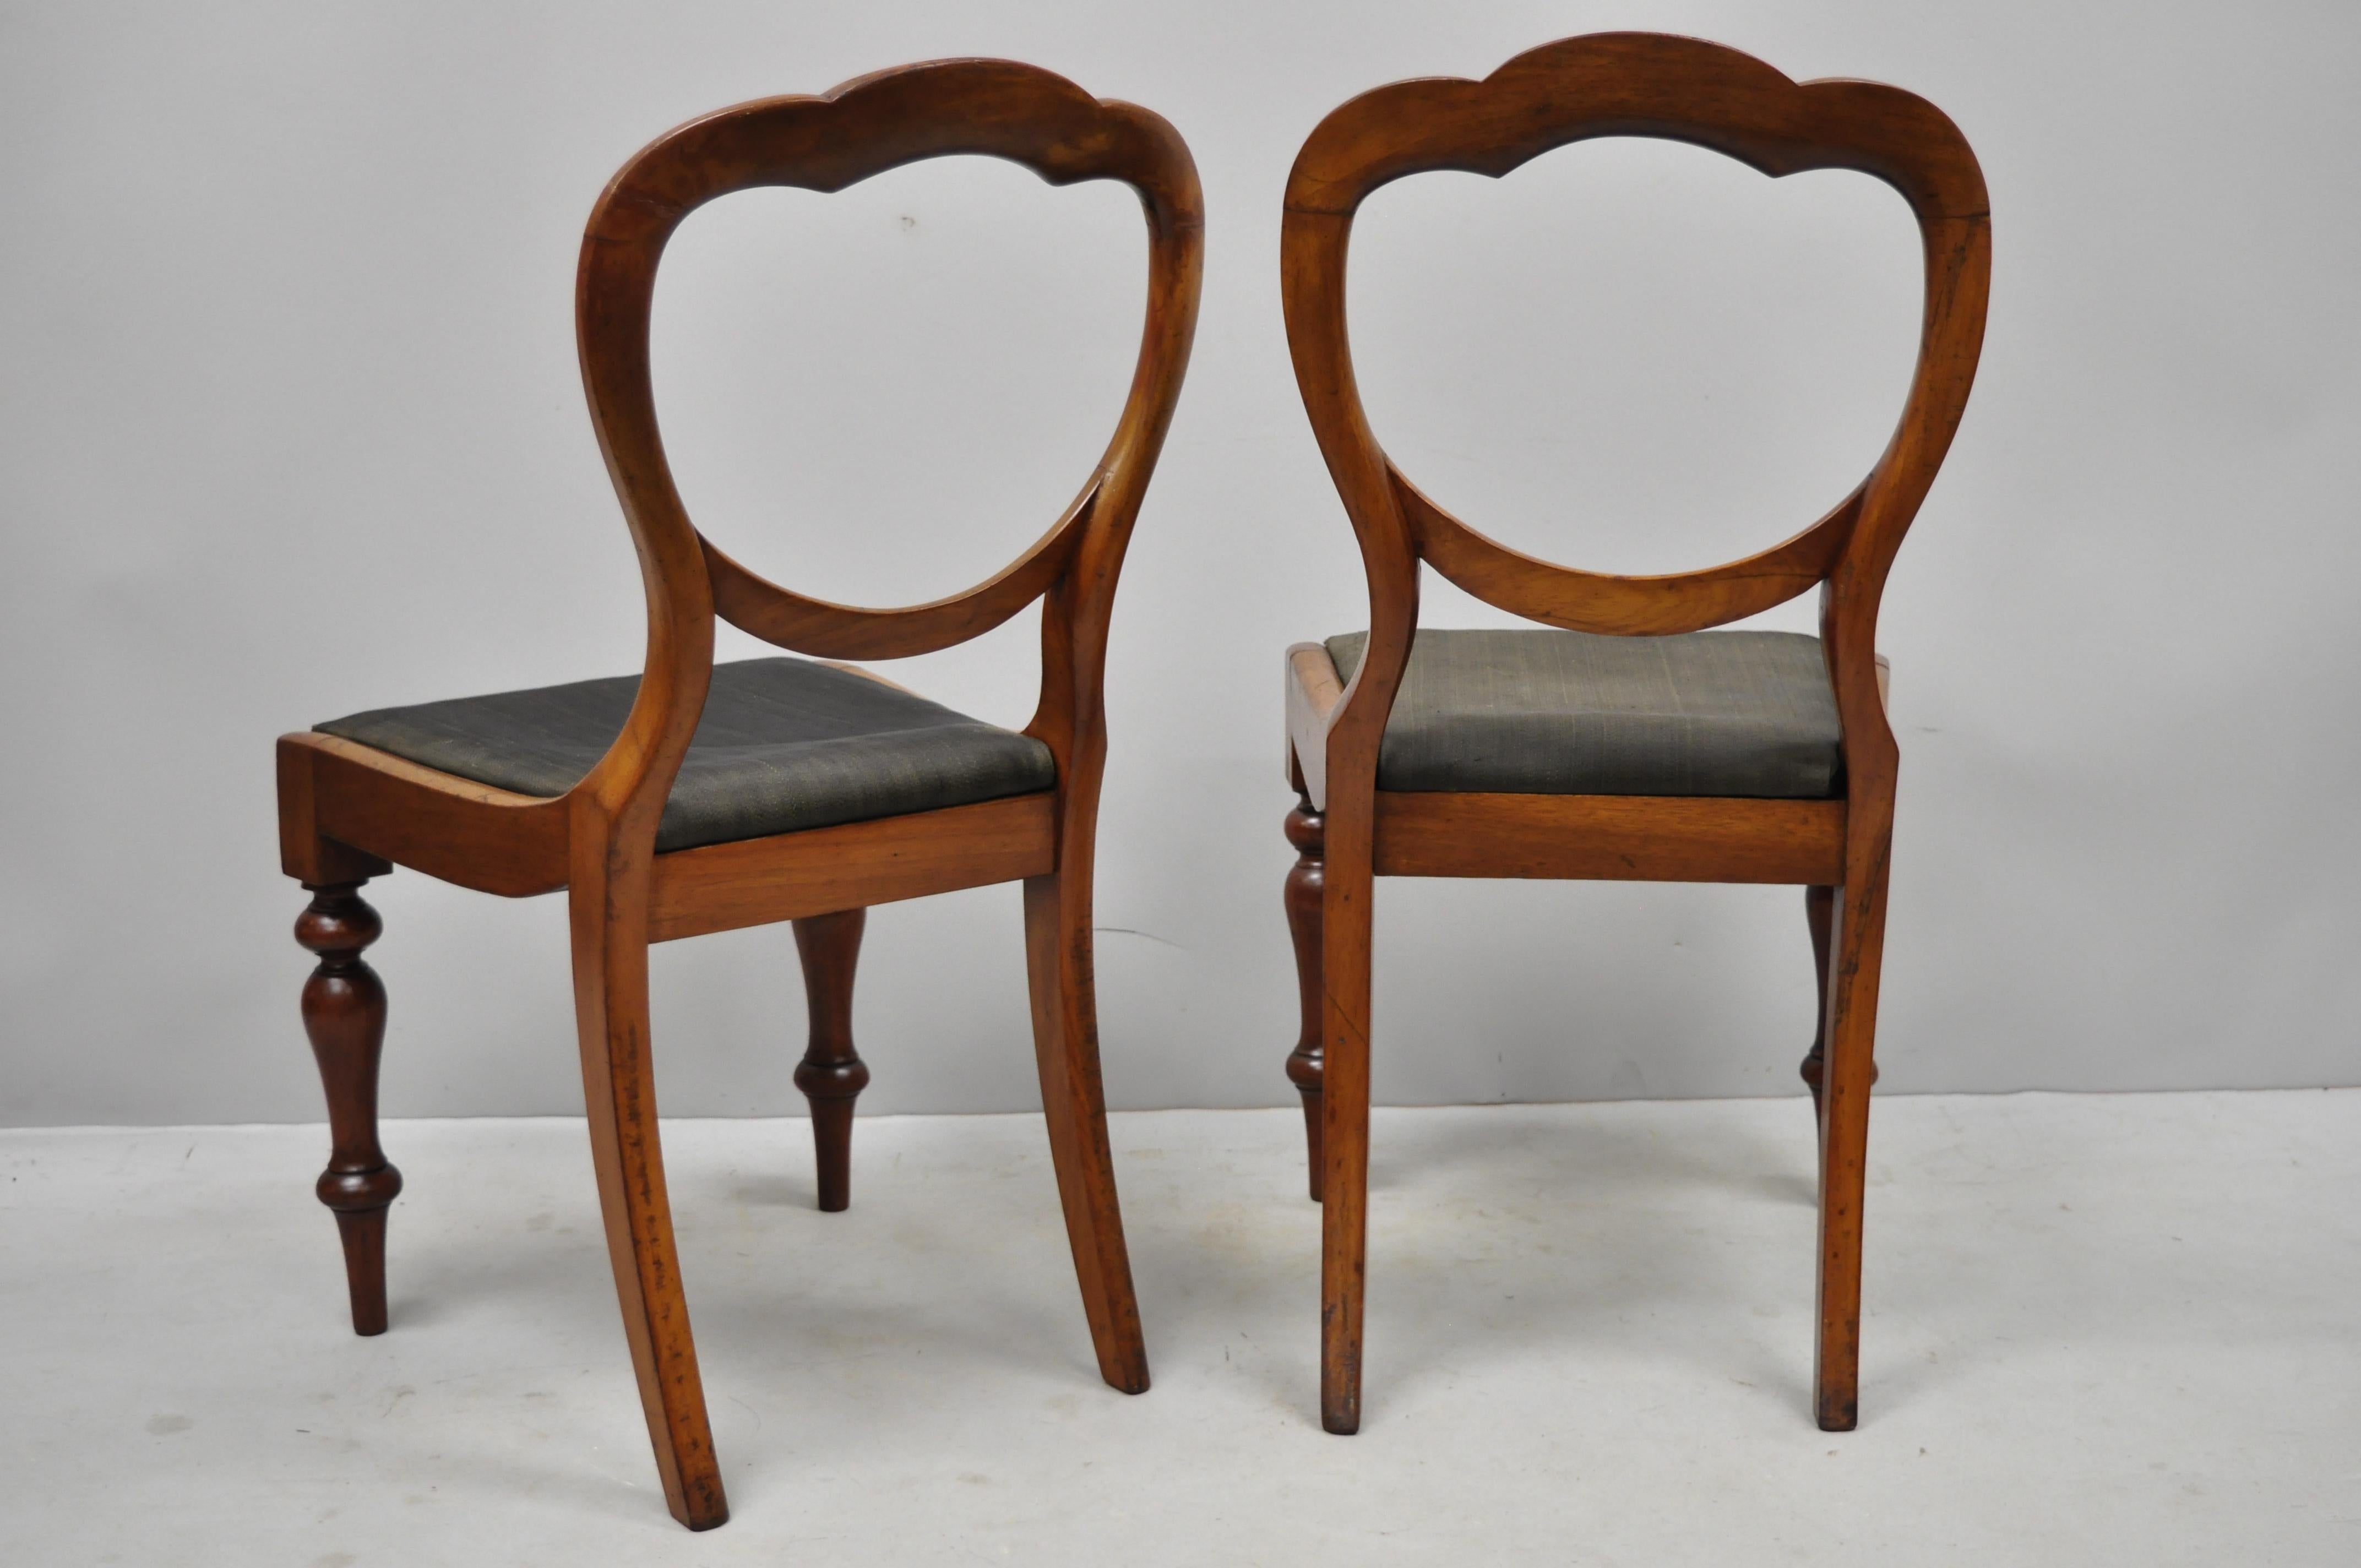 Antique 19th Century English Victorian Balloon Back Mahogany Library Side Chairs For Sale 3